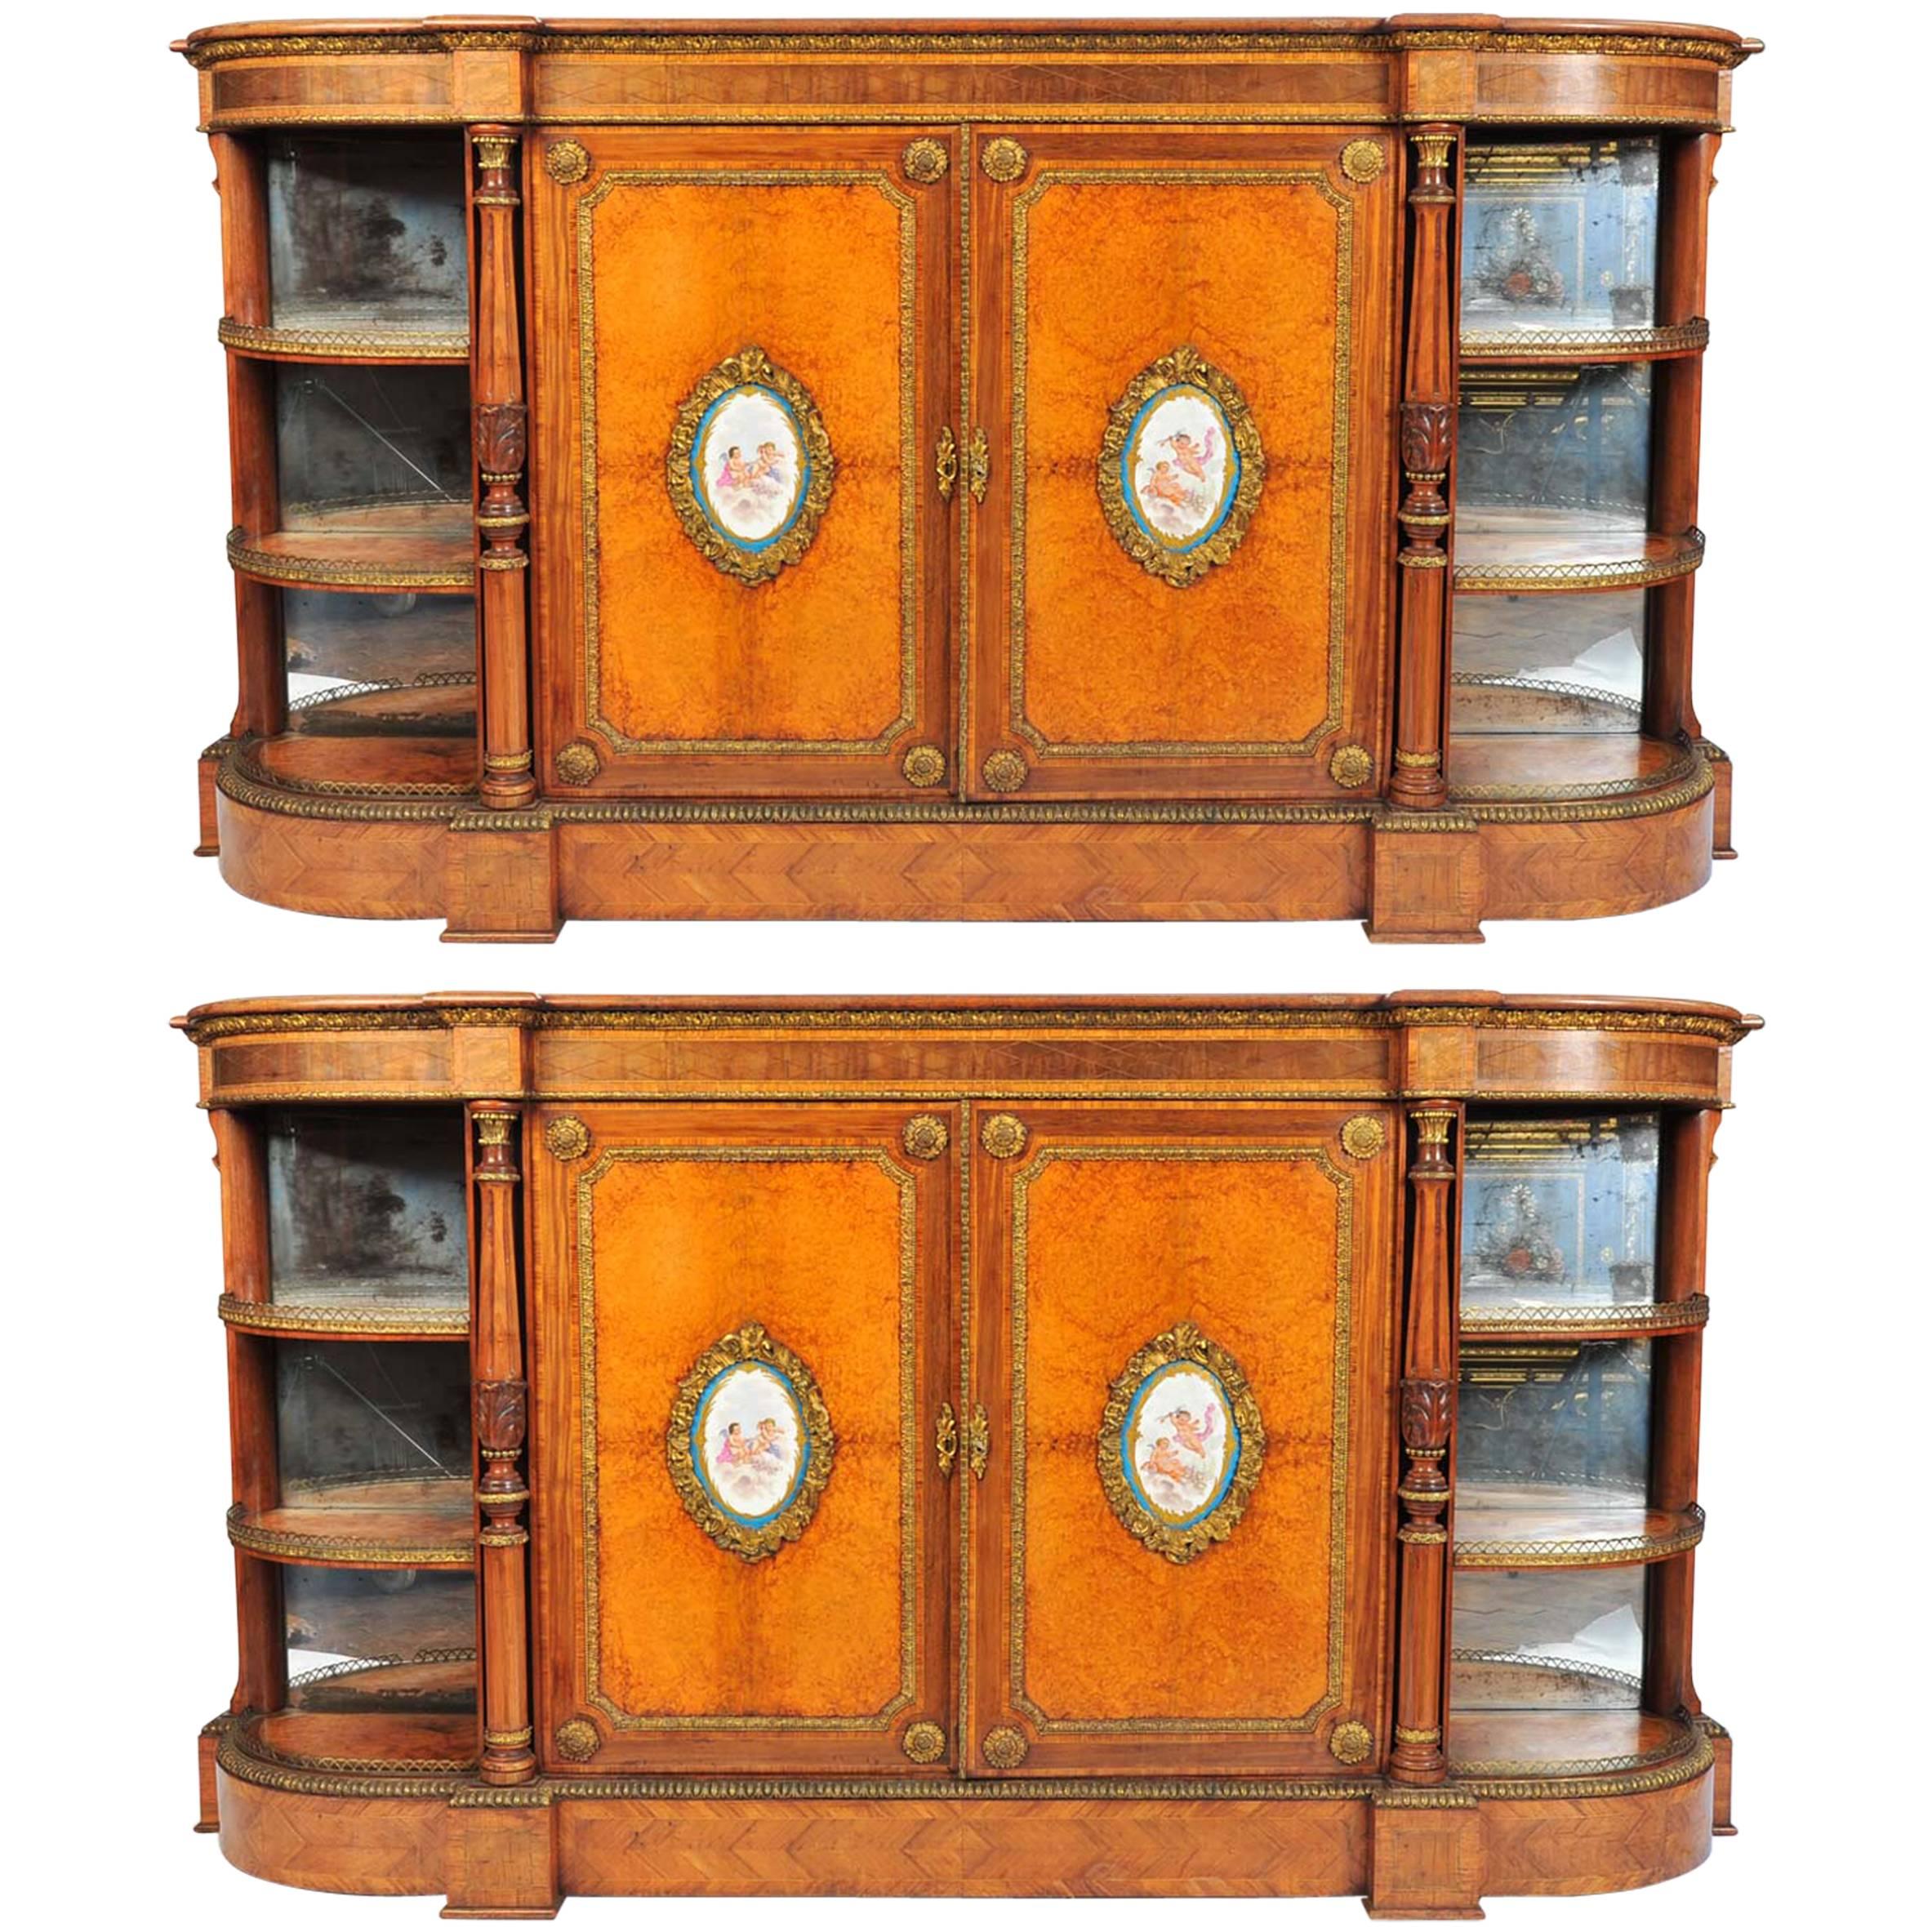 Pair of 19th Century porcelain mounted side cabinets